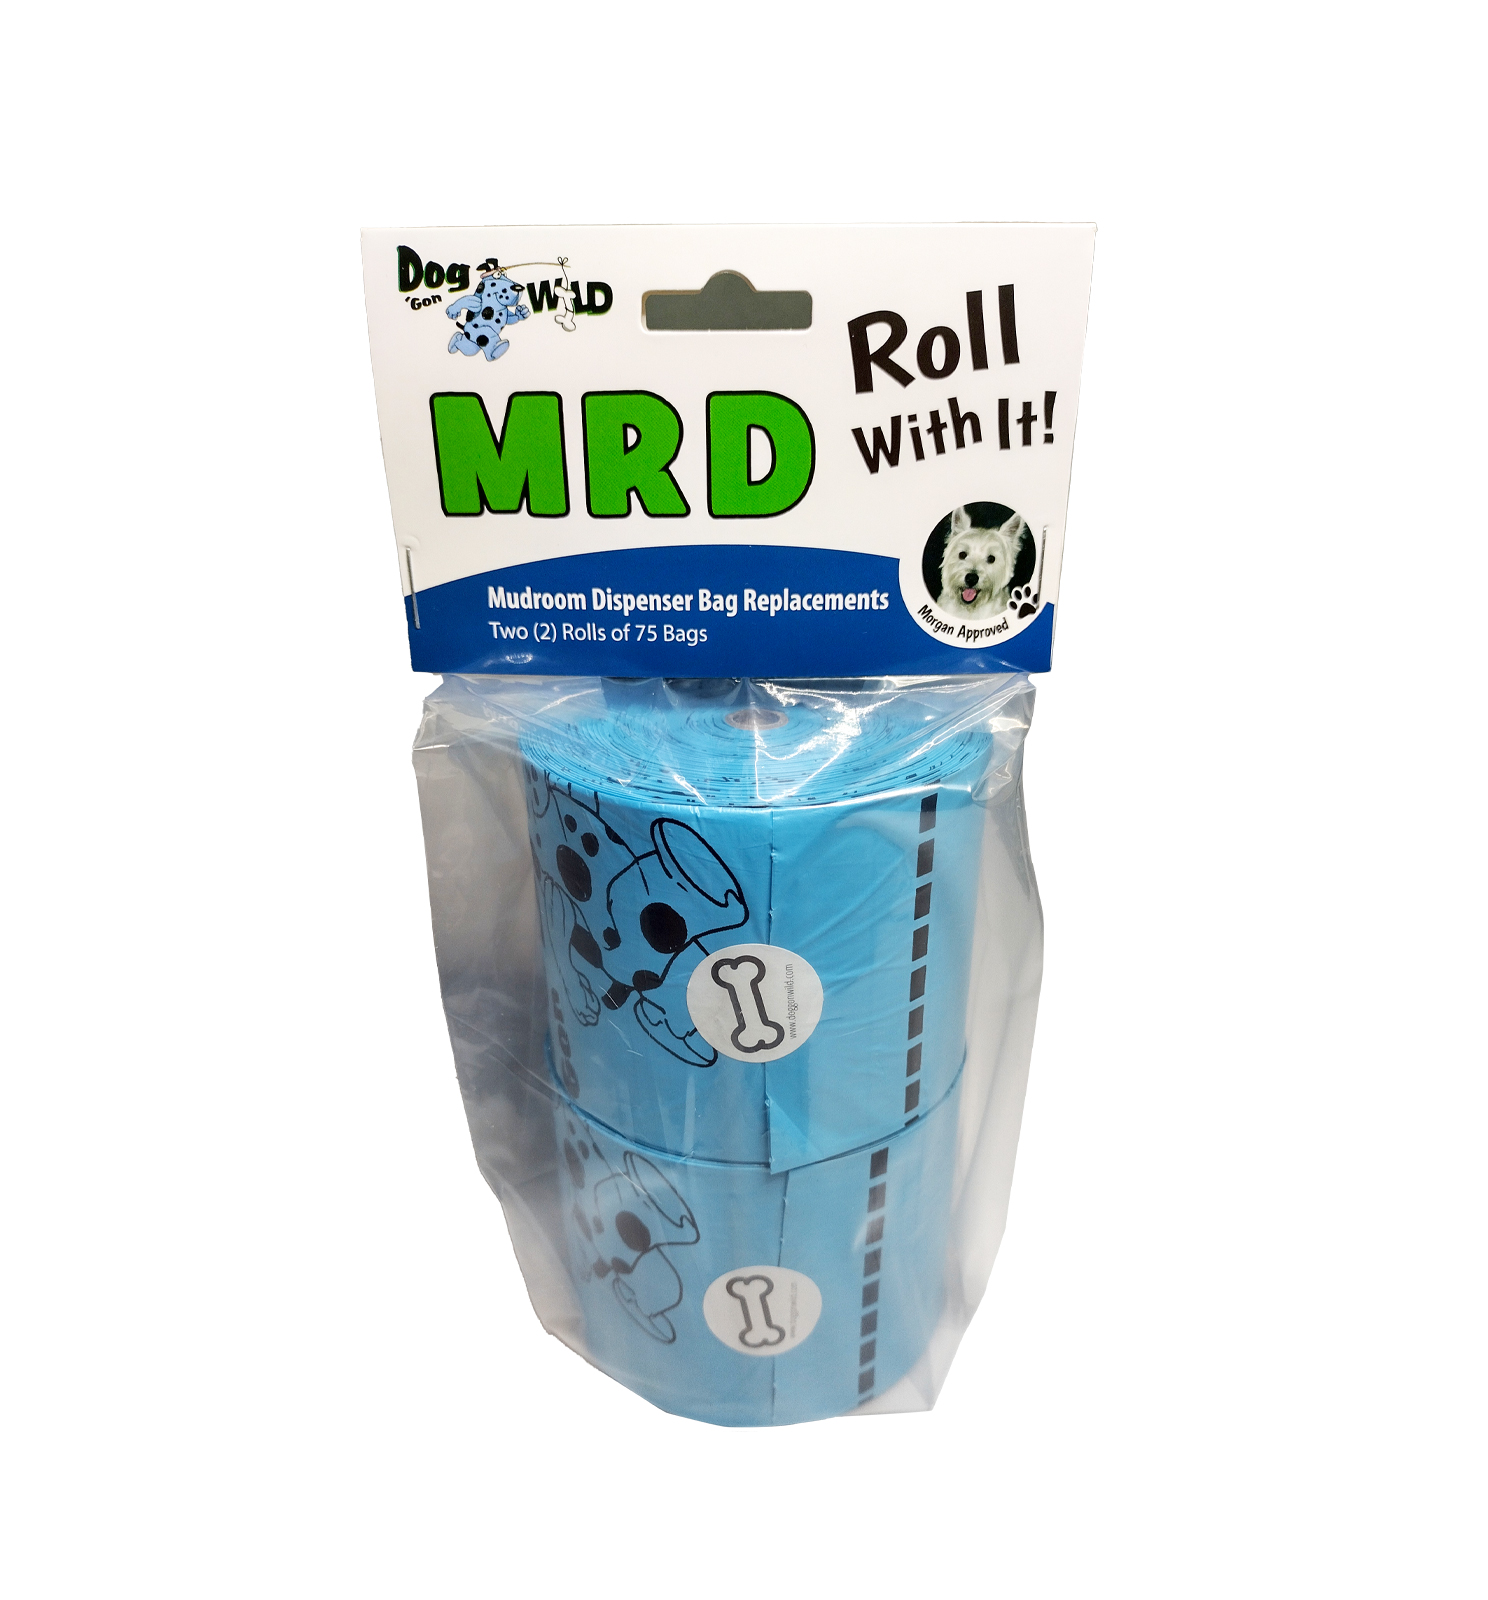 mrd replacement dog waste bag roll